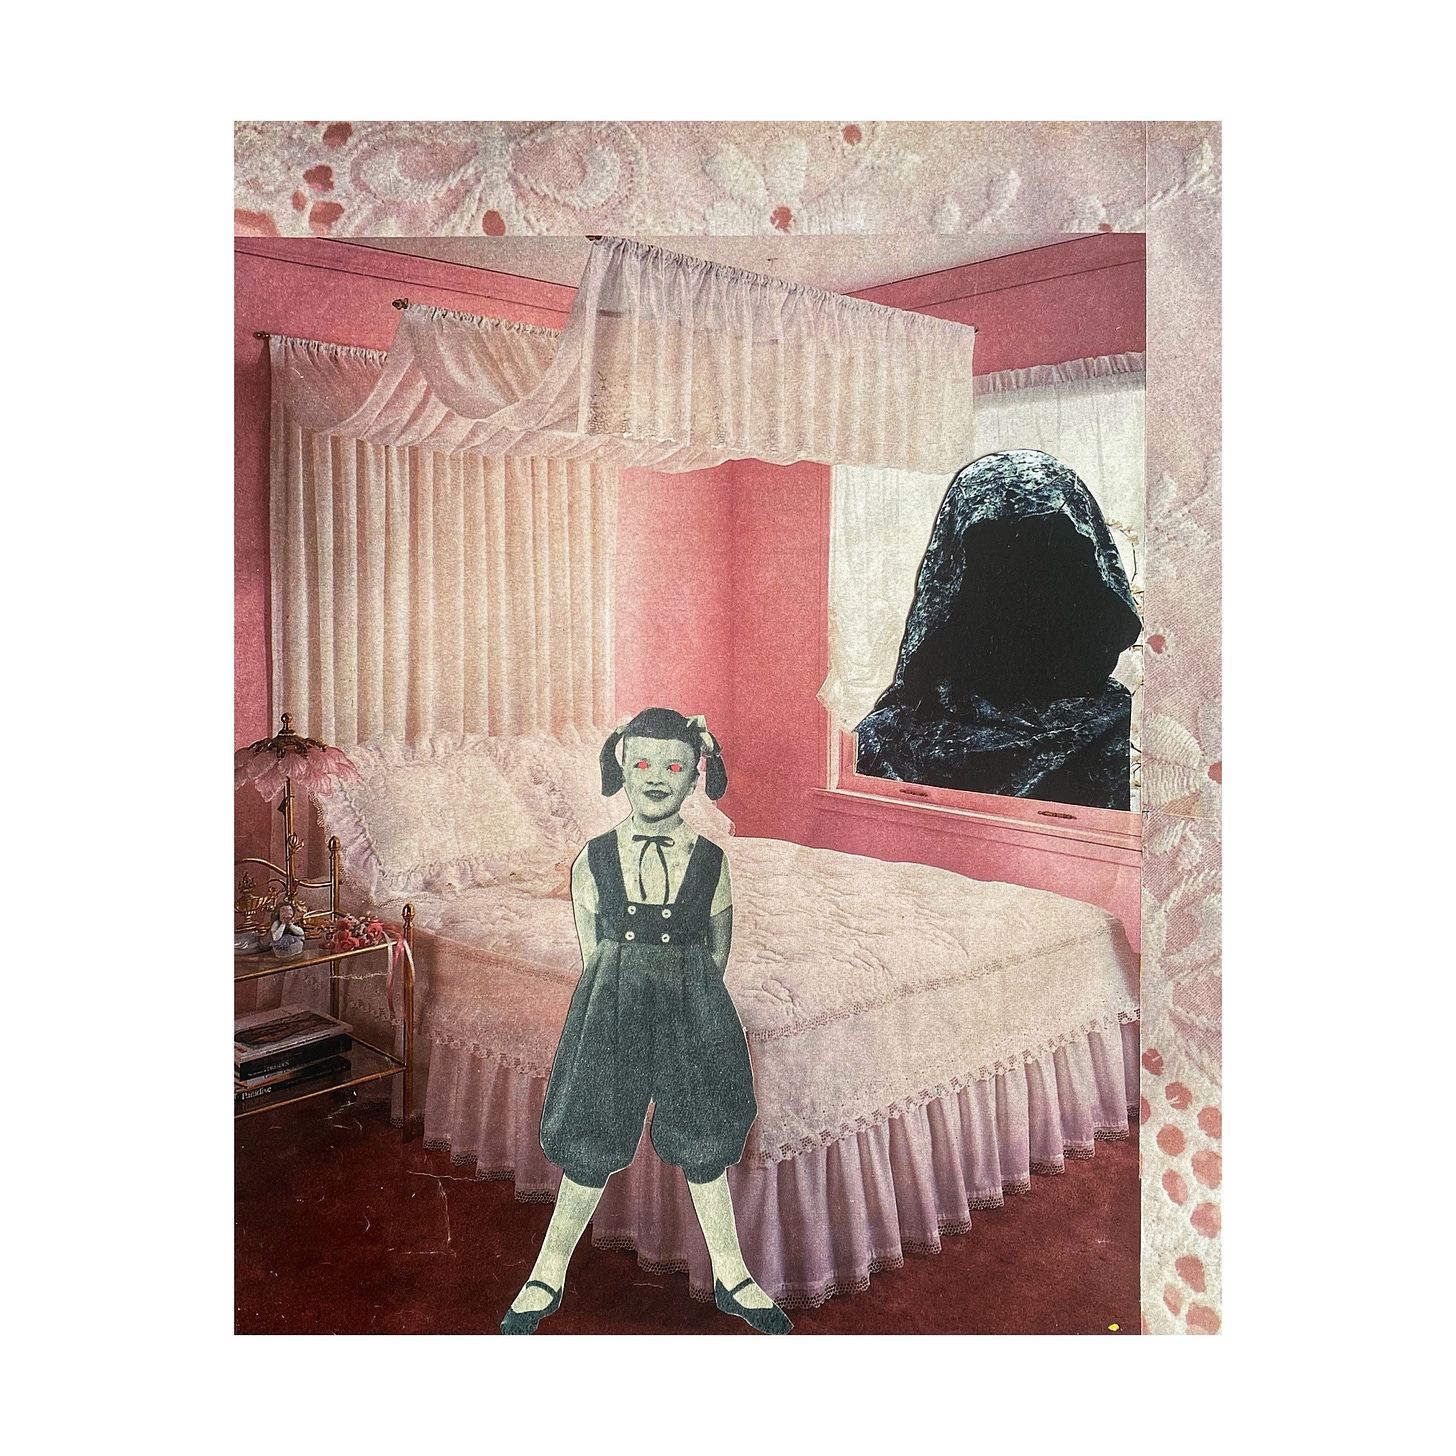 Collage of a red-eyed girl in a pink bedroom